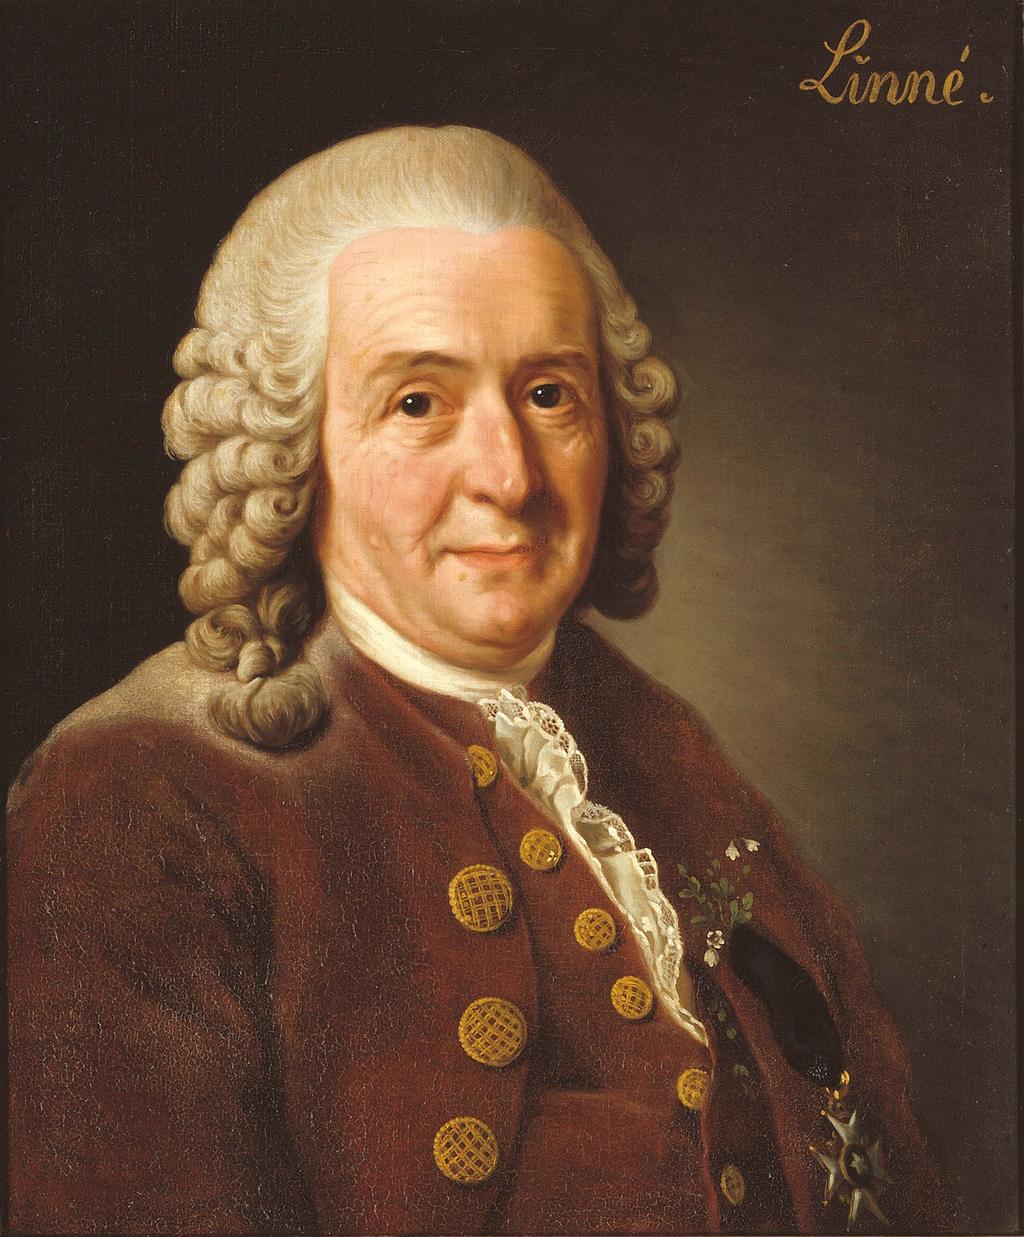 Carl Linnaeus (1707-1778) Considered the father of modern taxonomy for his work in the hierarchical classification of the species.